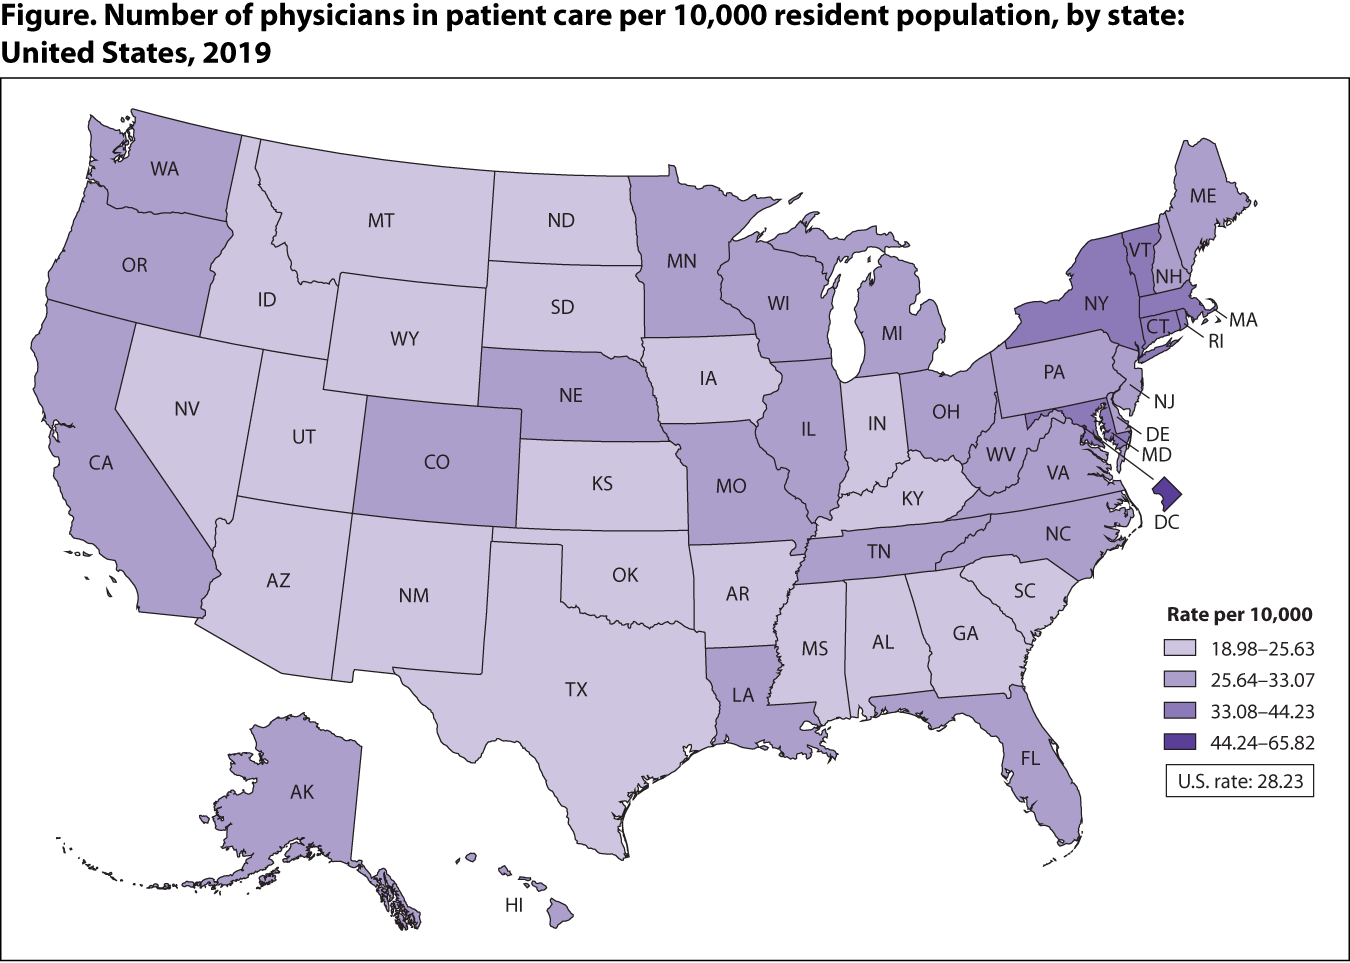 Figure is a map of the United States showing the number of physicians in patient care per 10,000 resident population in each of the 50 states and the District of Columbia for 2019.